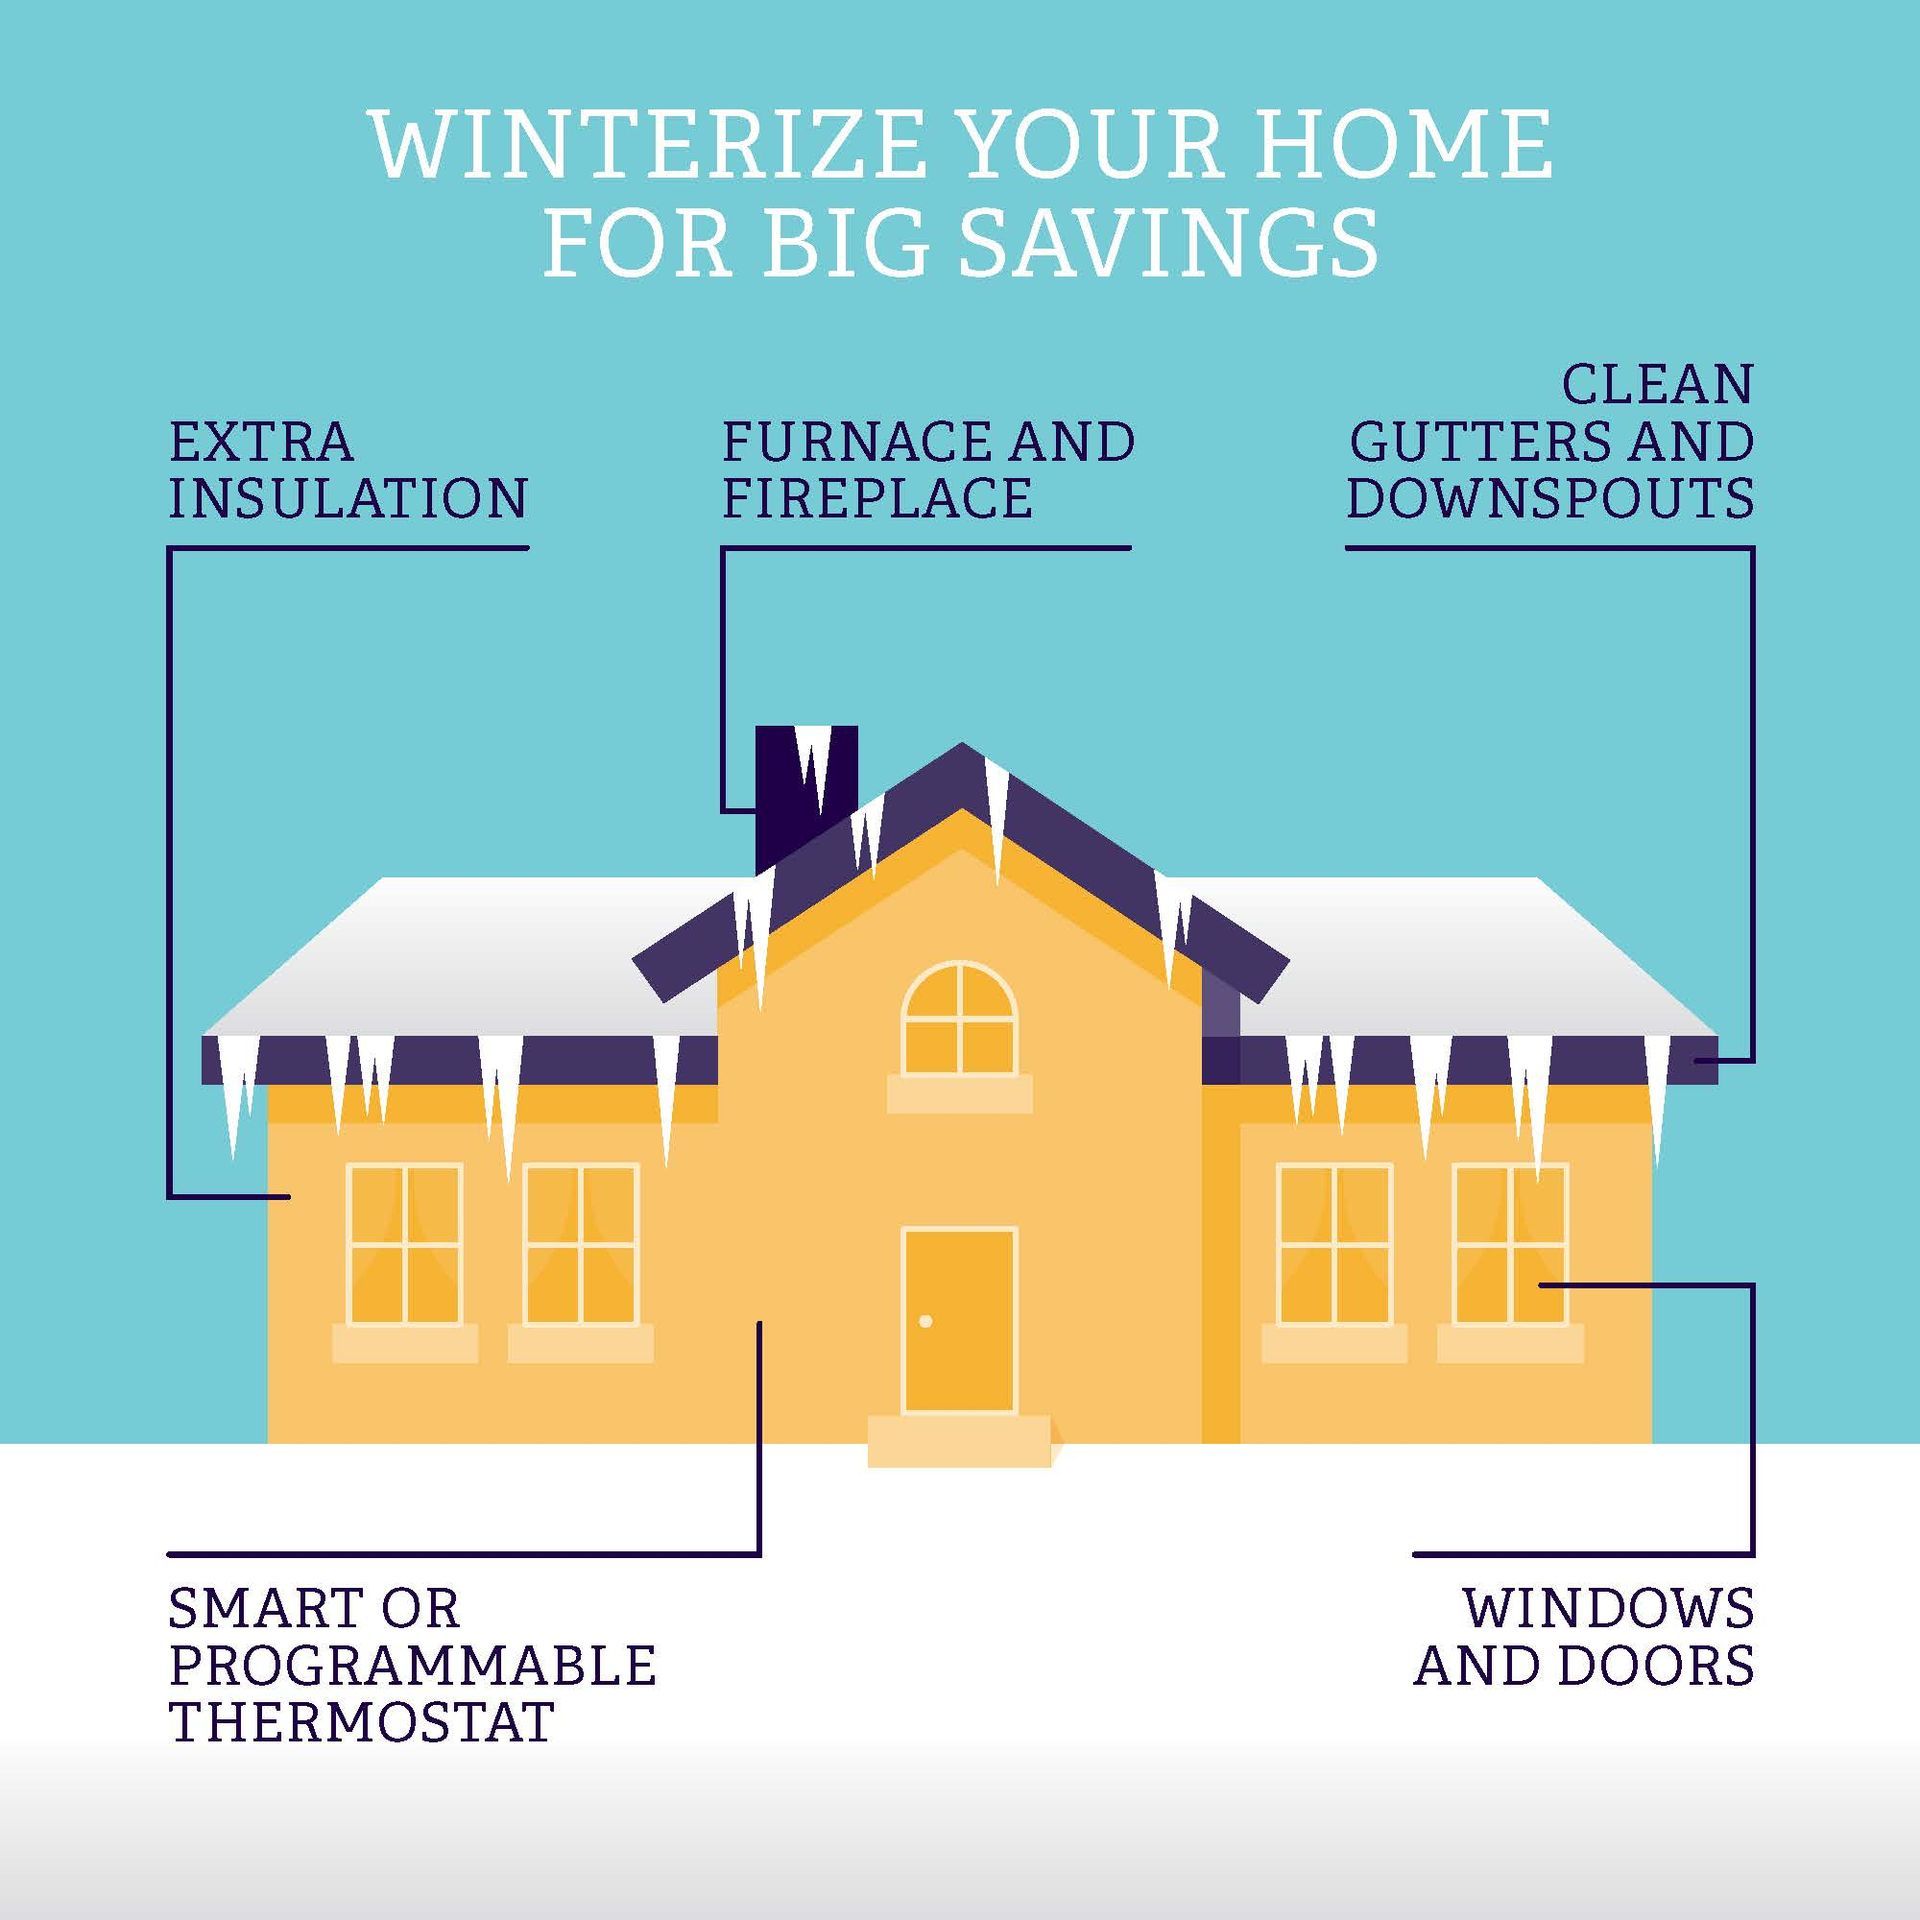 How do you winterize your home, shut off water, lower the heat,unplug electronics, antifreeze toilet